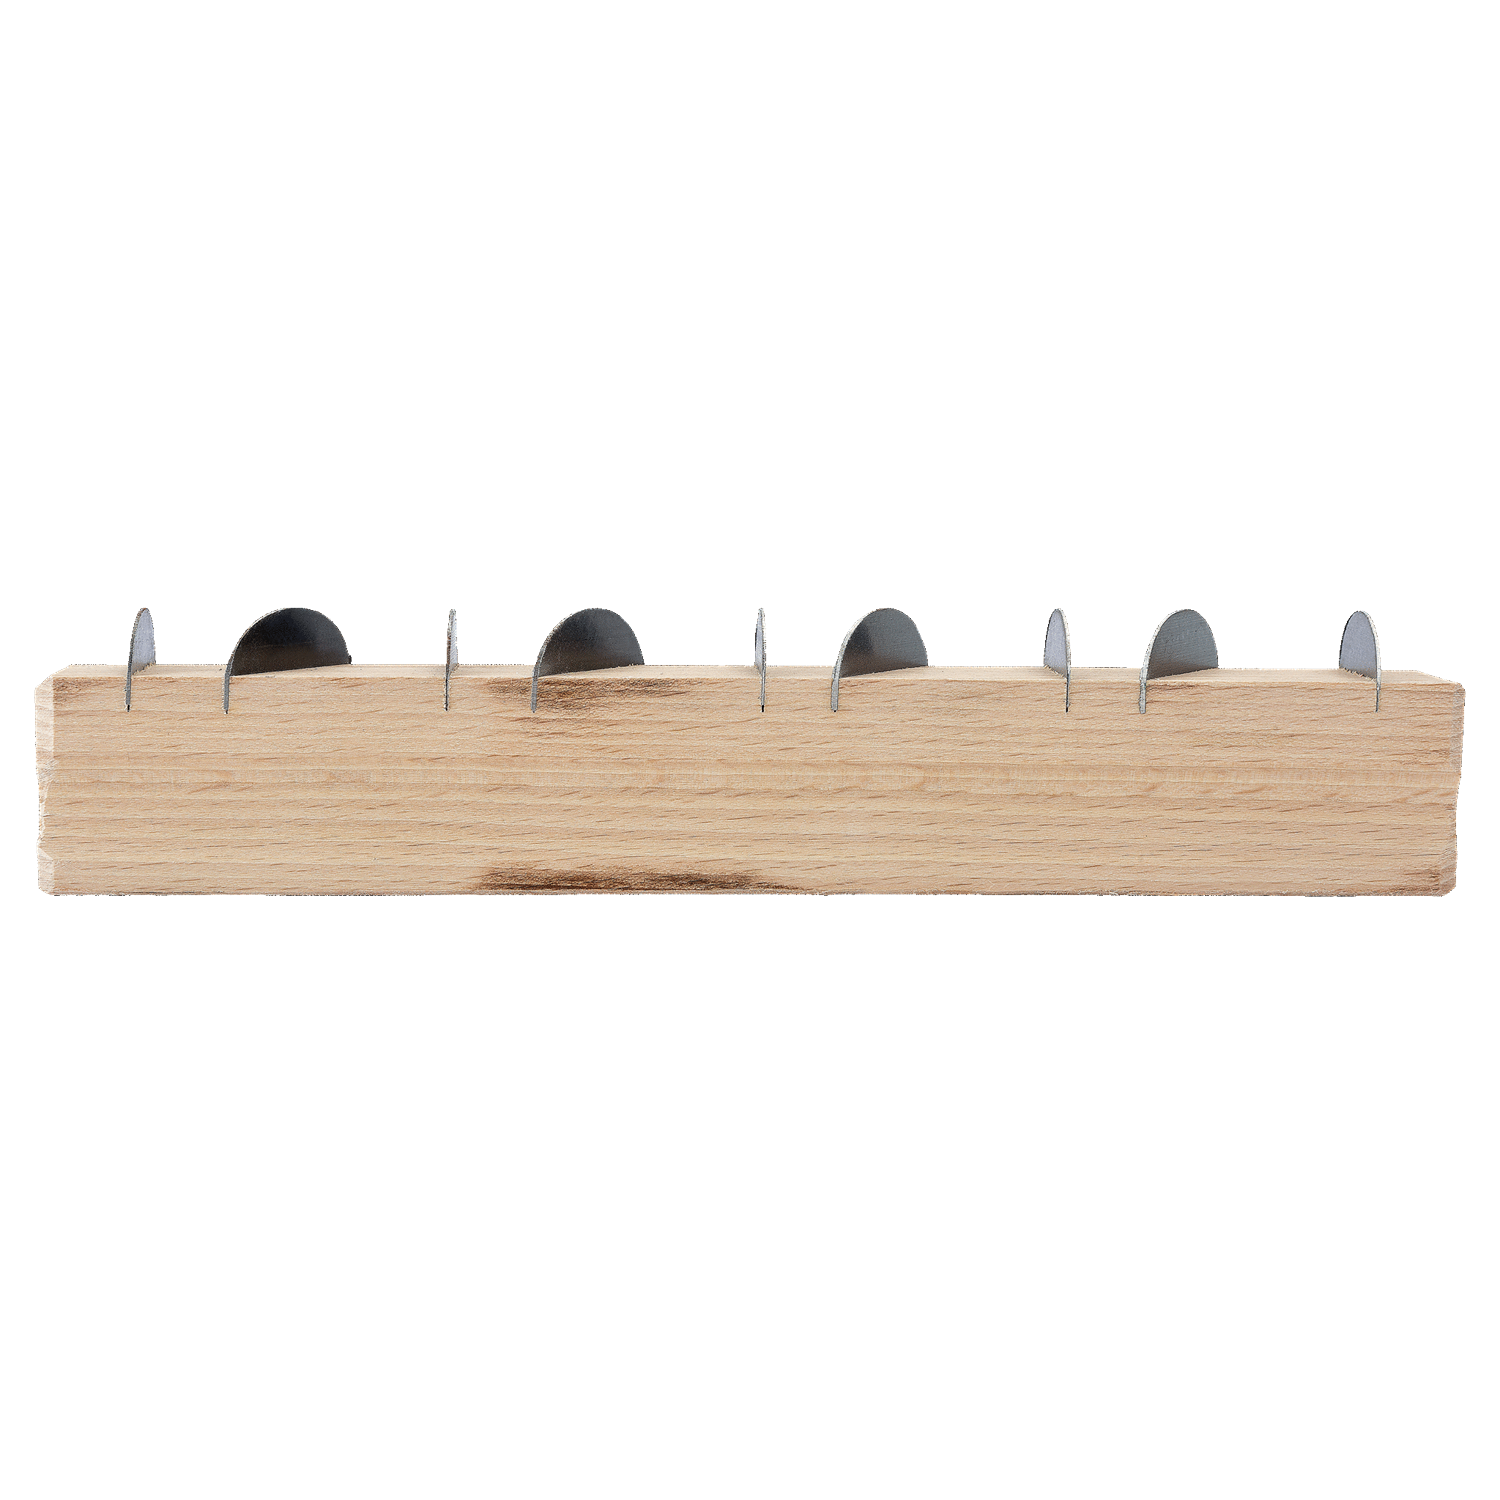 BAHCO 2145xxxC Curved Plasterer’s Rails (BAHCO Tools) - Premium Plasterer’s Rails from BAHCO - Shop now at Yew Aik.